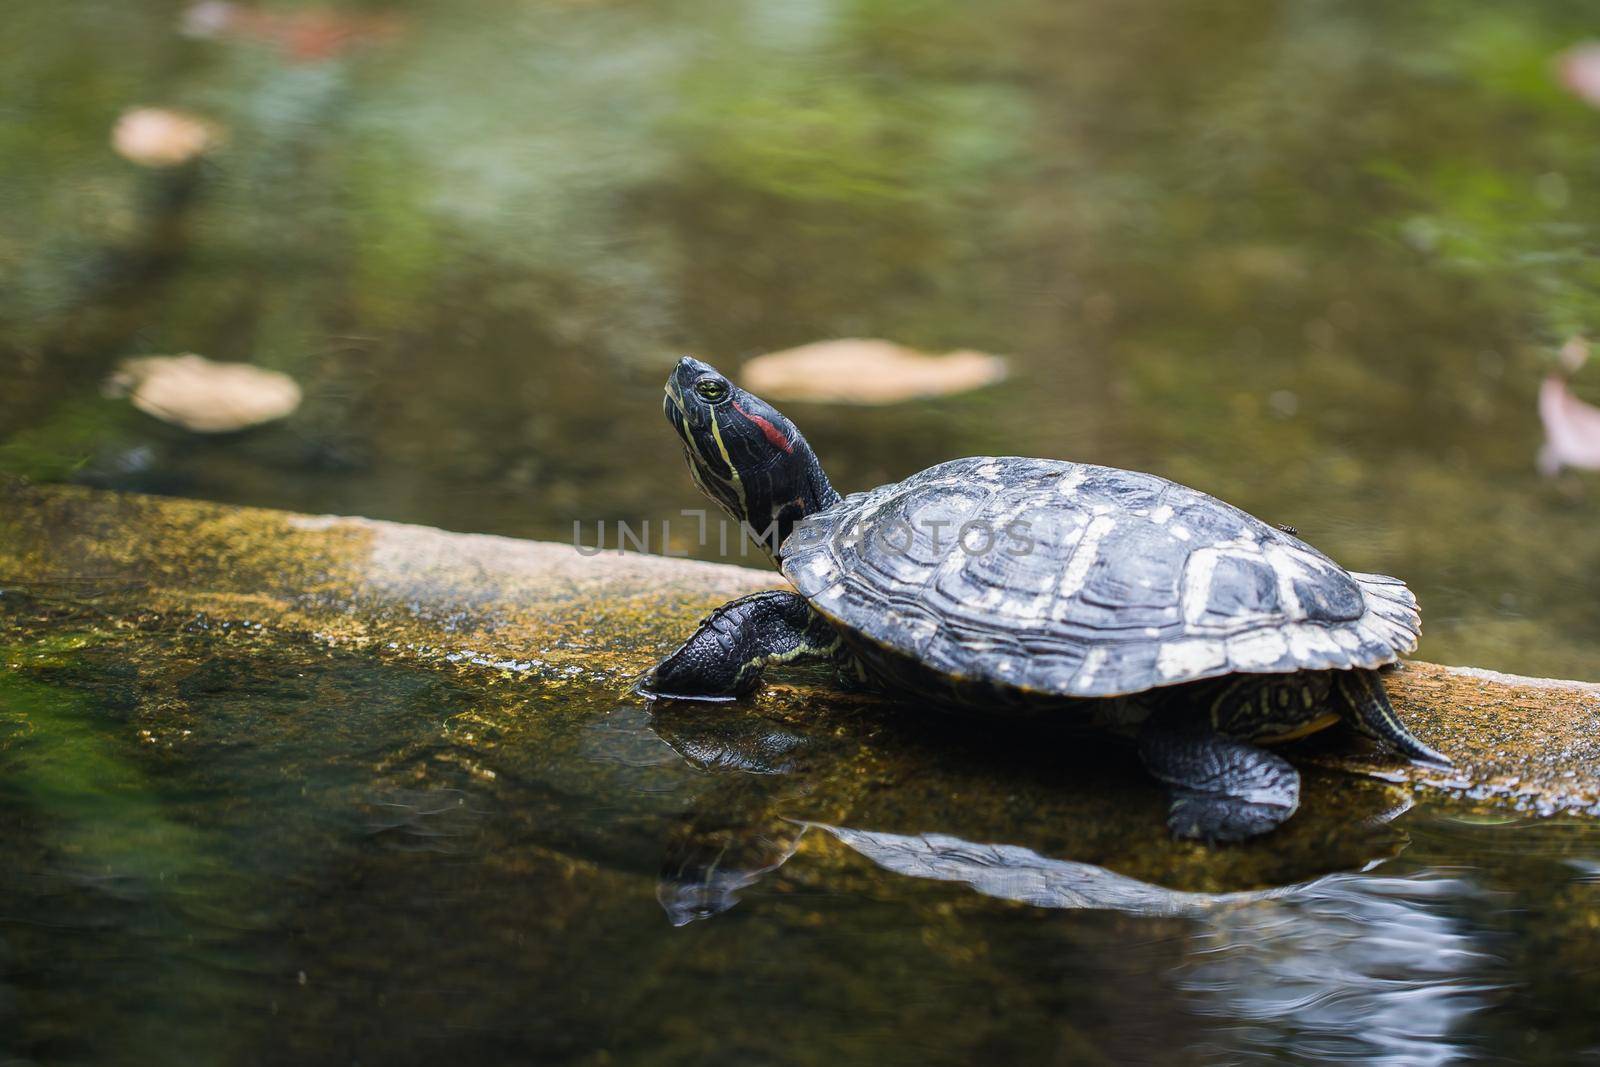 A small red-eared turtle in a pond.